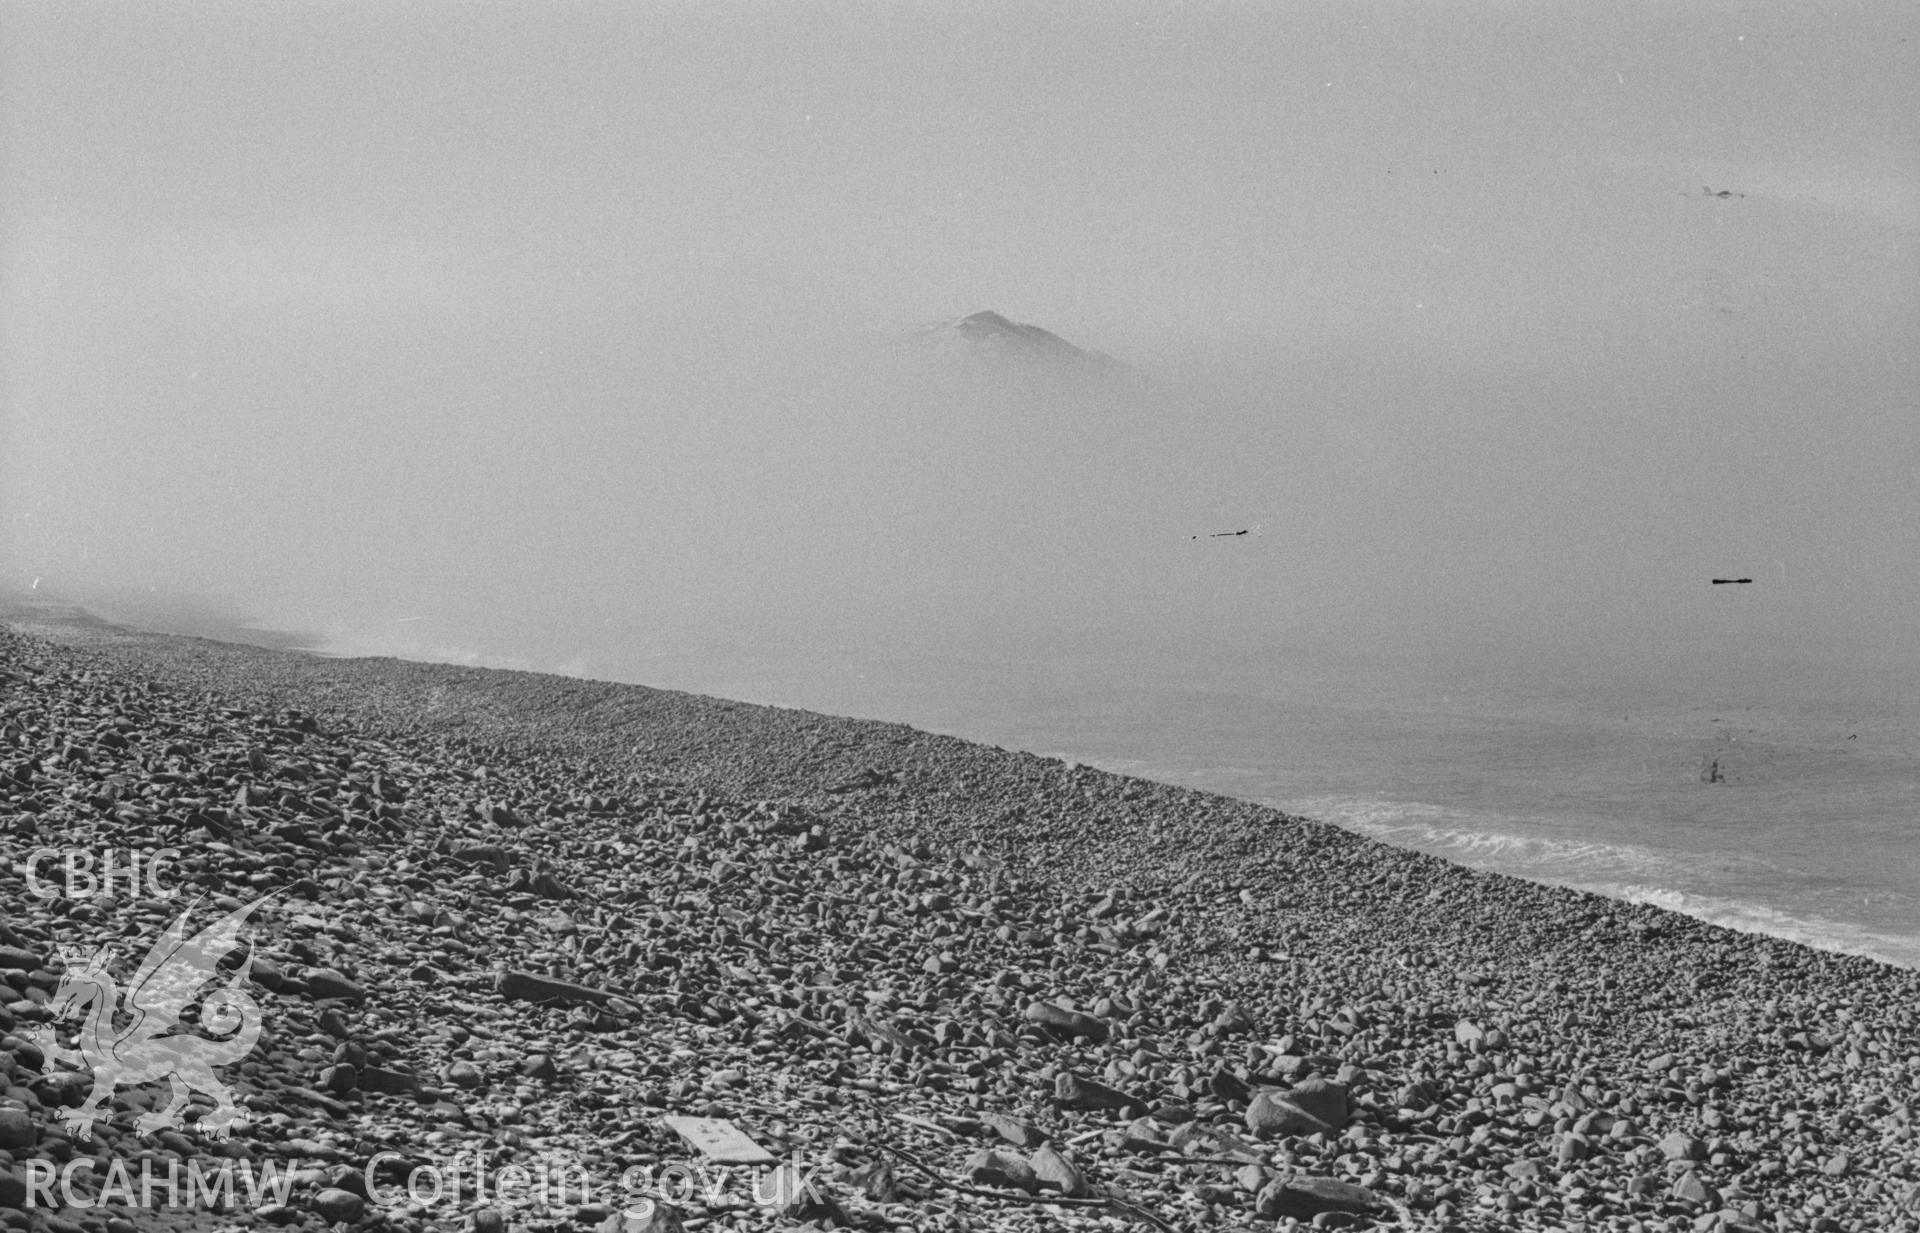 Digital copy of a black and white negative showing Allt-Wen and Tan-y-Bwlch beach from the store pier; snow and sea mist. Photographed by Arthur O. Chater in April 1968. (Looking south south west from Grid Reference SN 579 807).